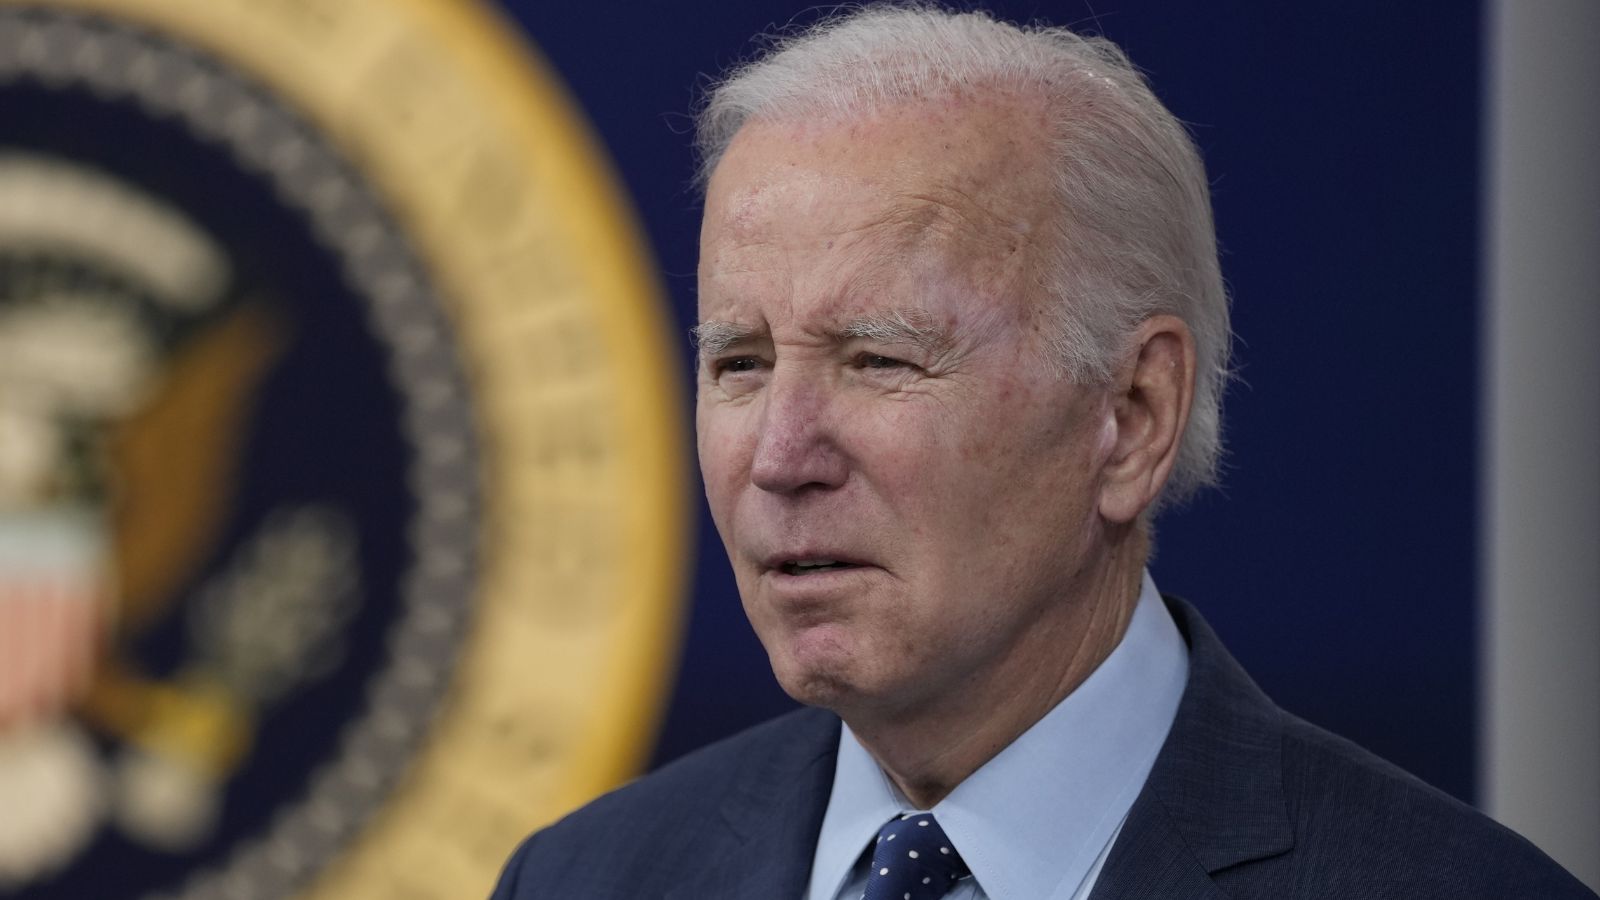 “The Ineptitude of the Biden Administration Has No Limits”: Biden Criticized for Admitting He Doesn’t Know When Hamas Will Release American Hostages